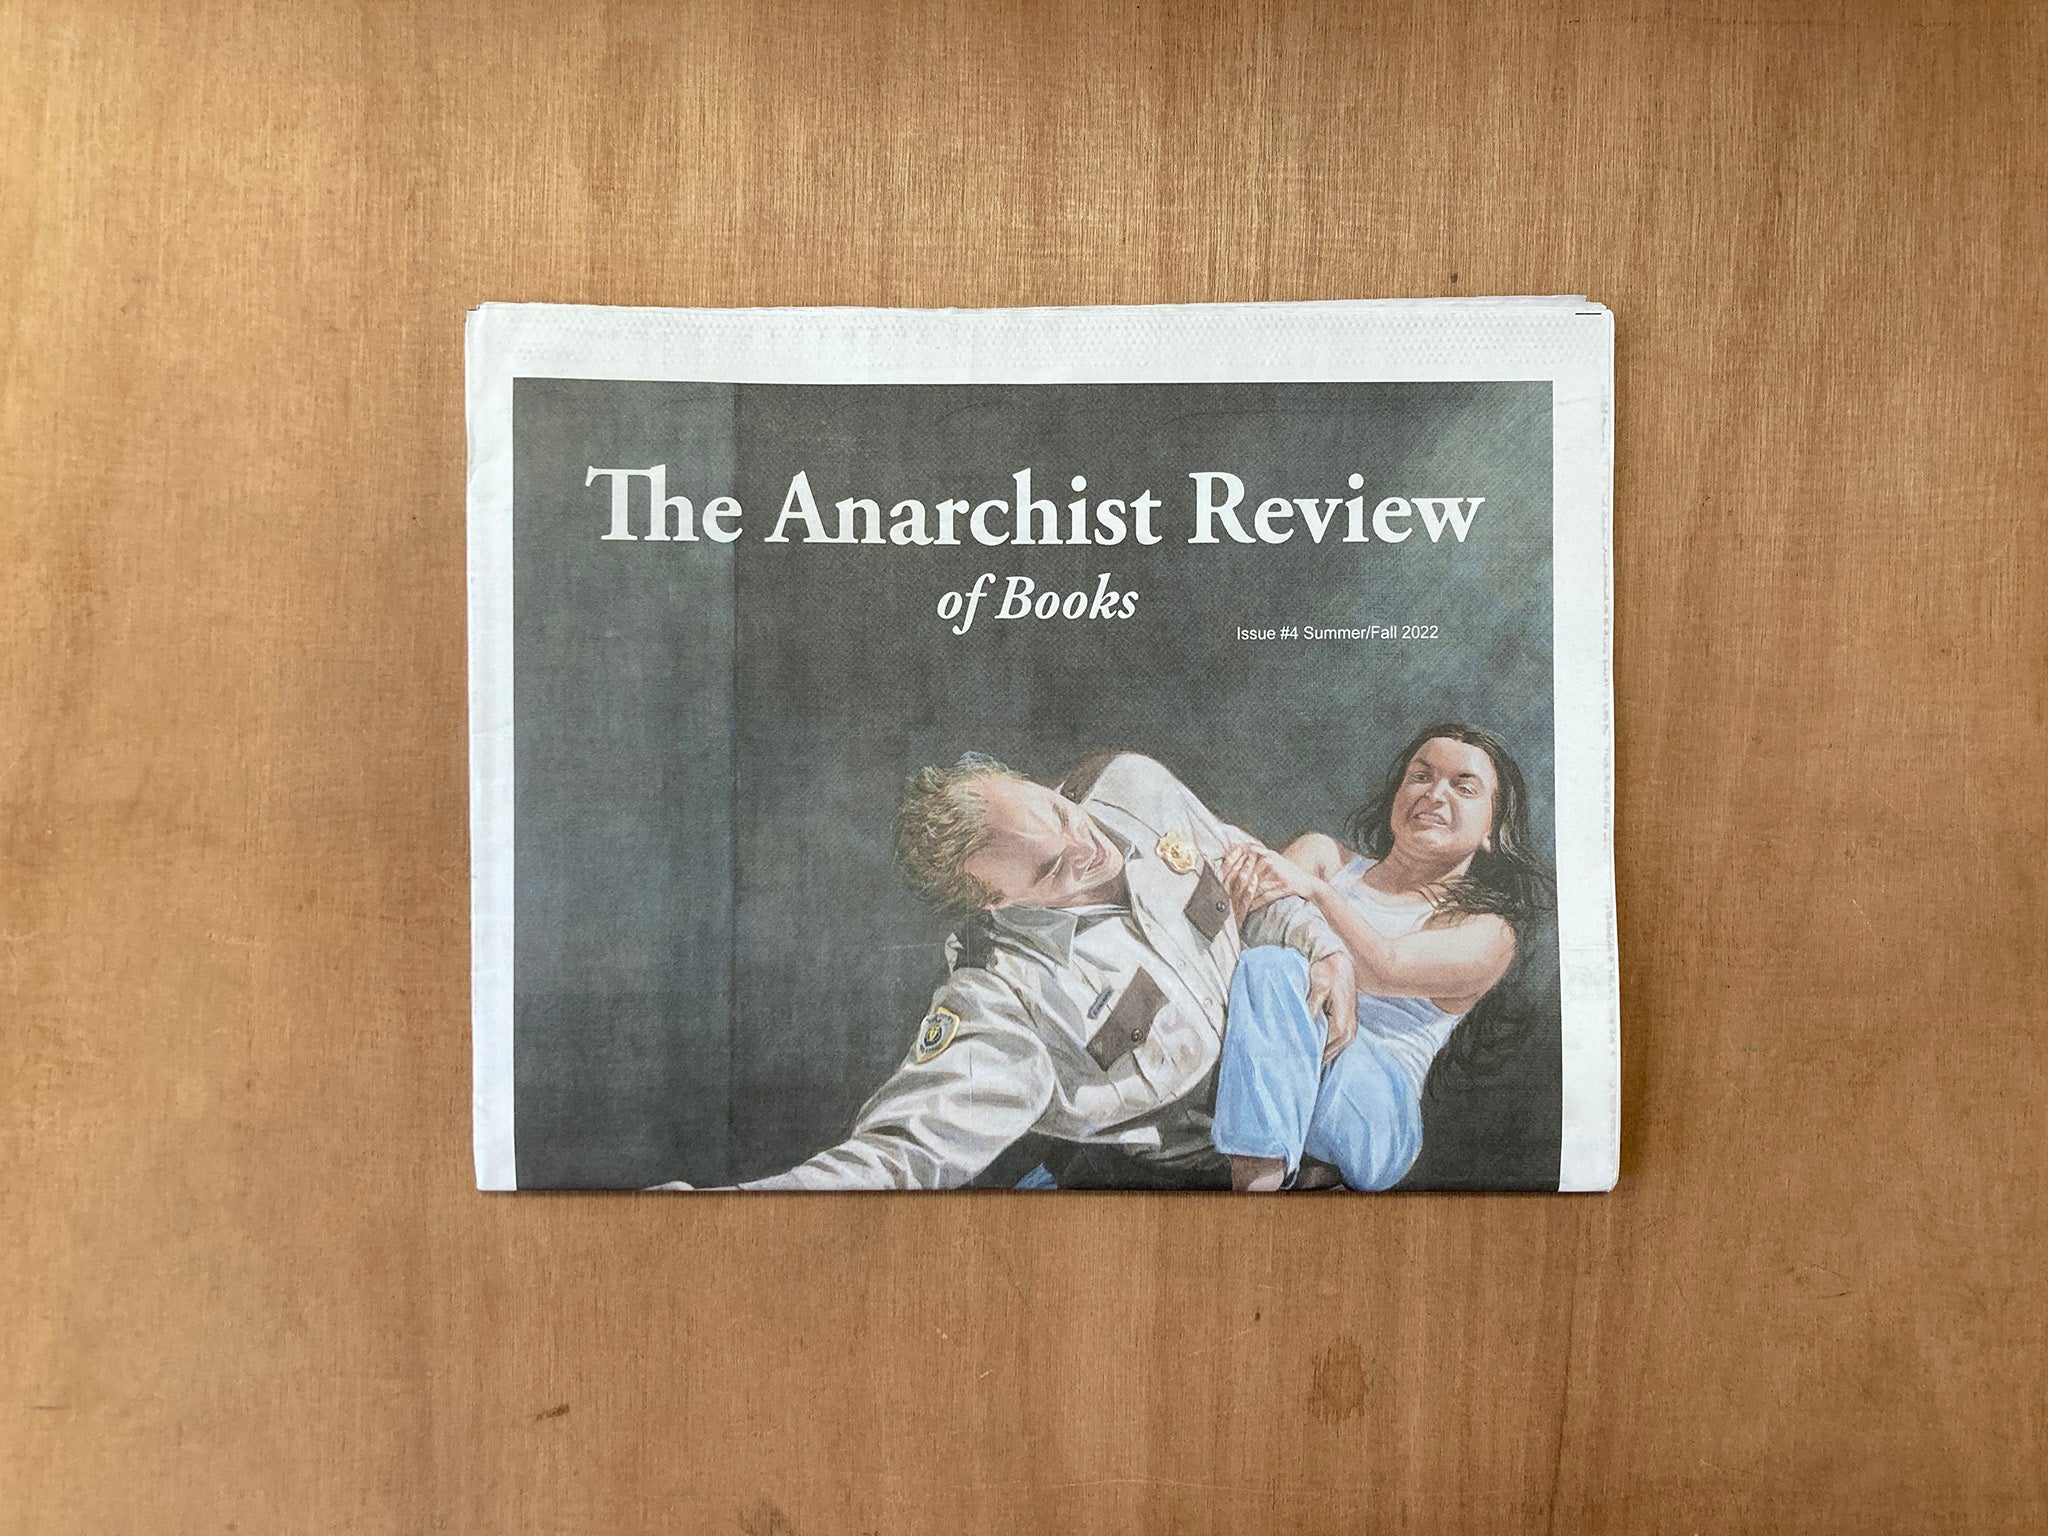 THE ANARCHIST REVIEW OF BOOKS ISSUE #4